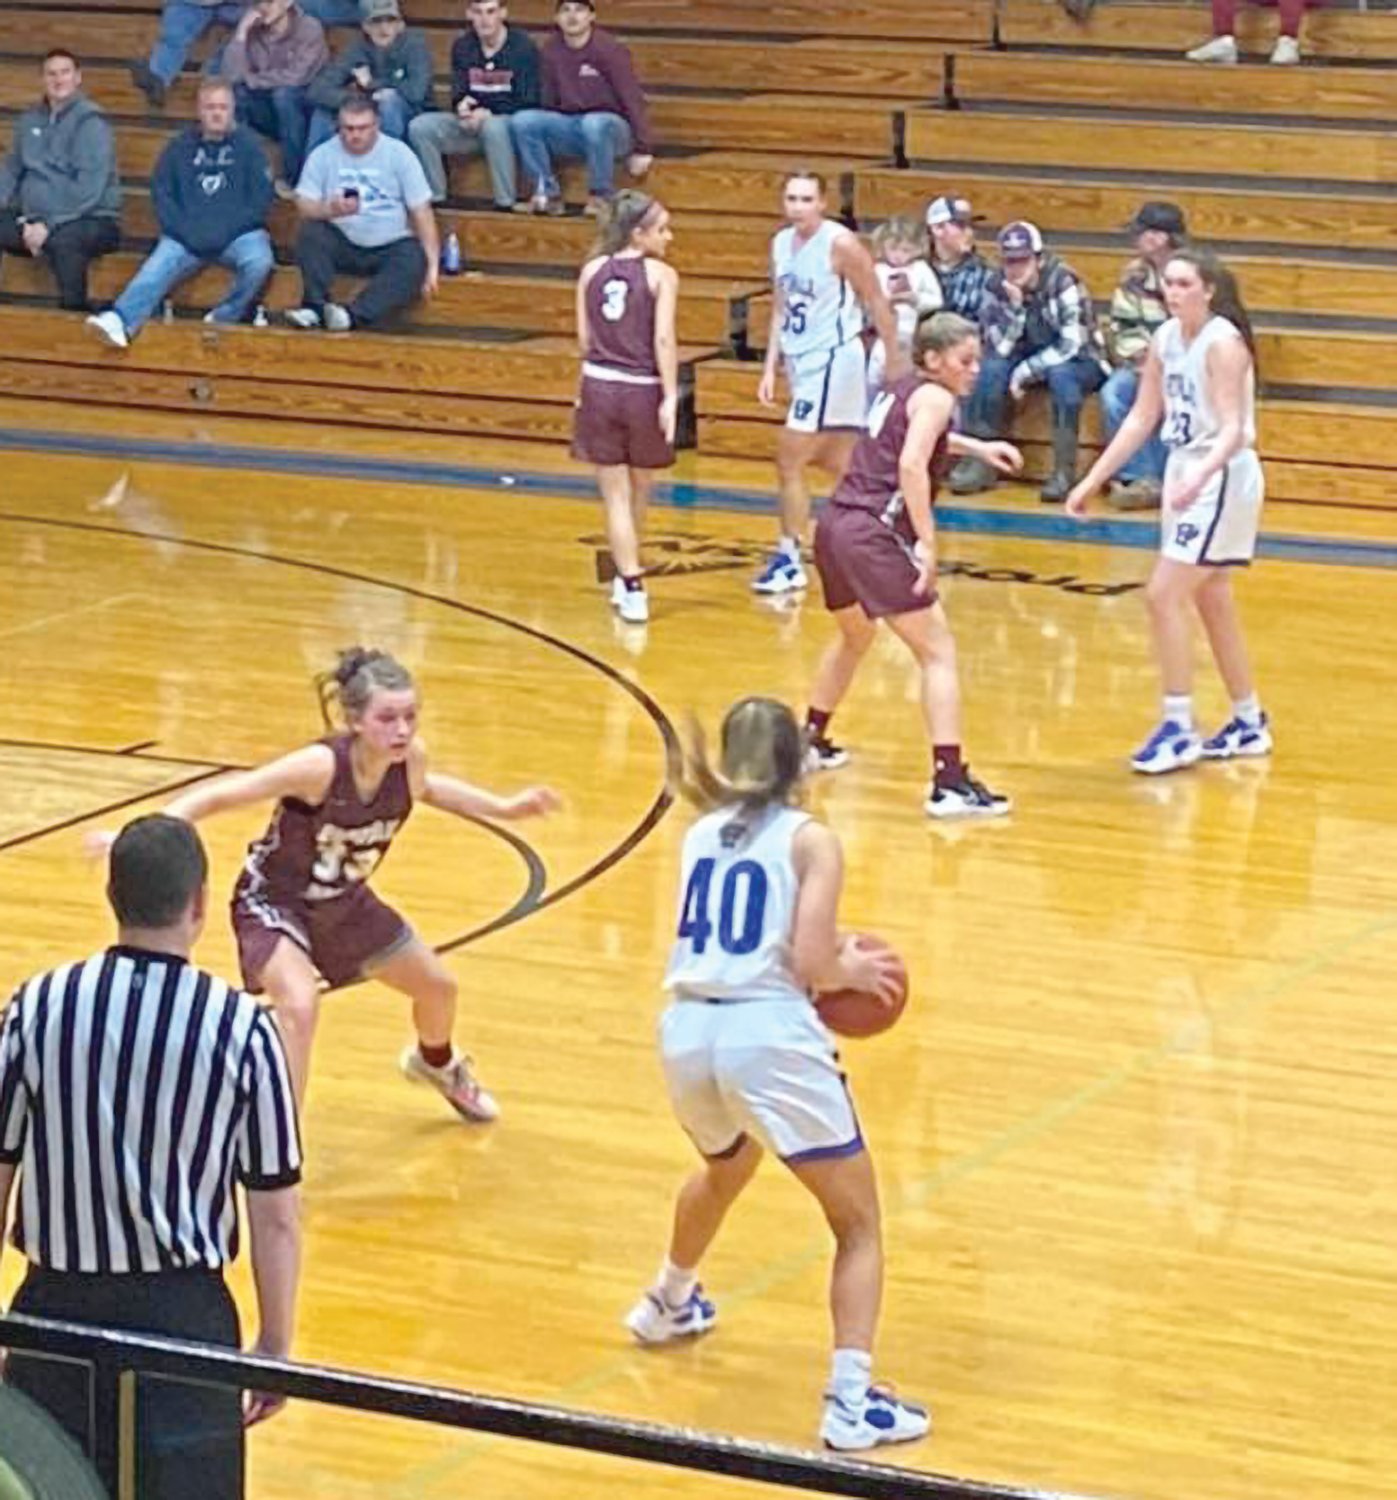 Hartville and Mountain Grove do battle on the Lady Eagles’ court.